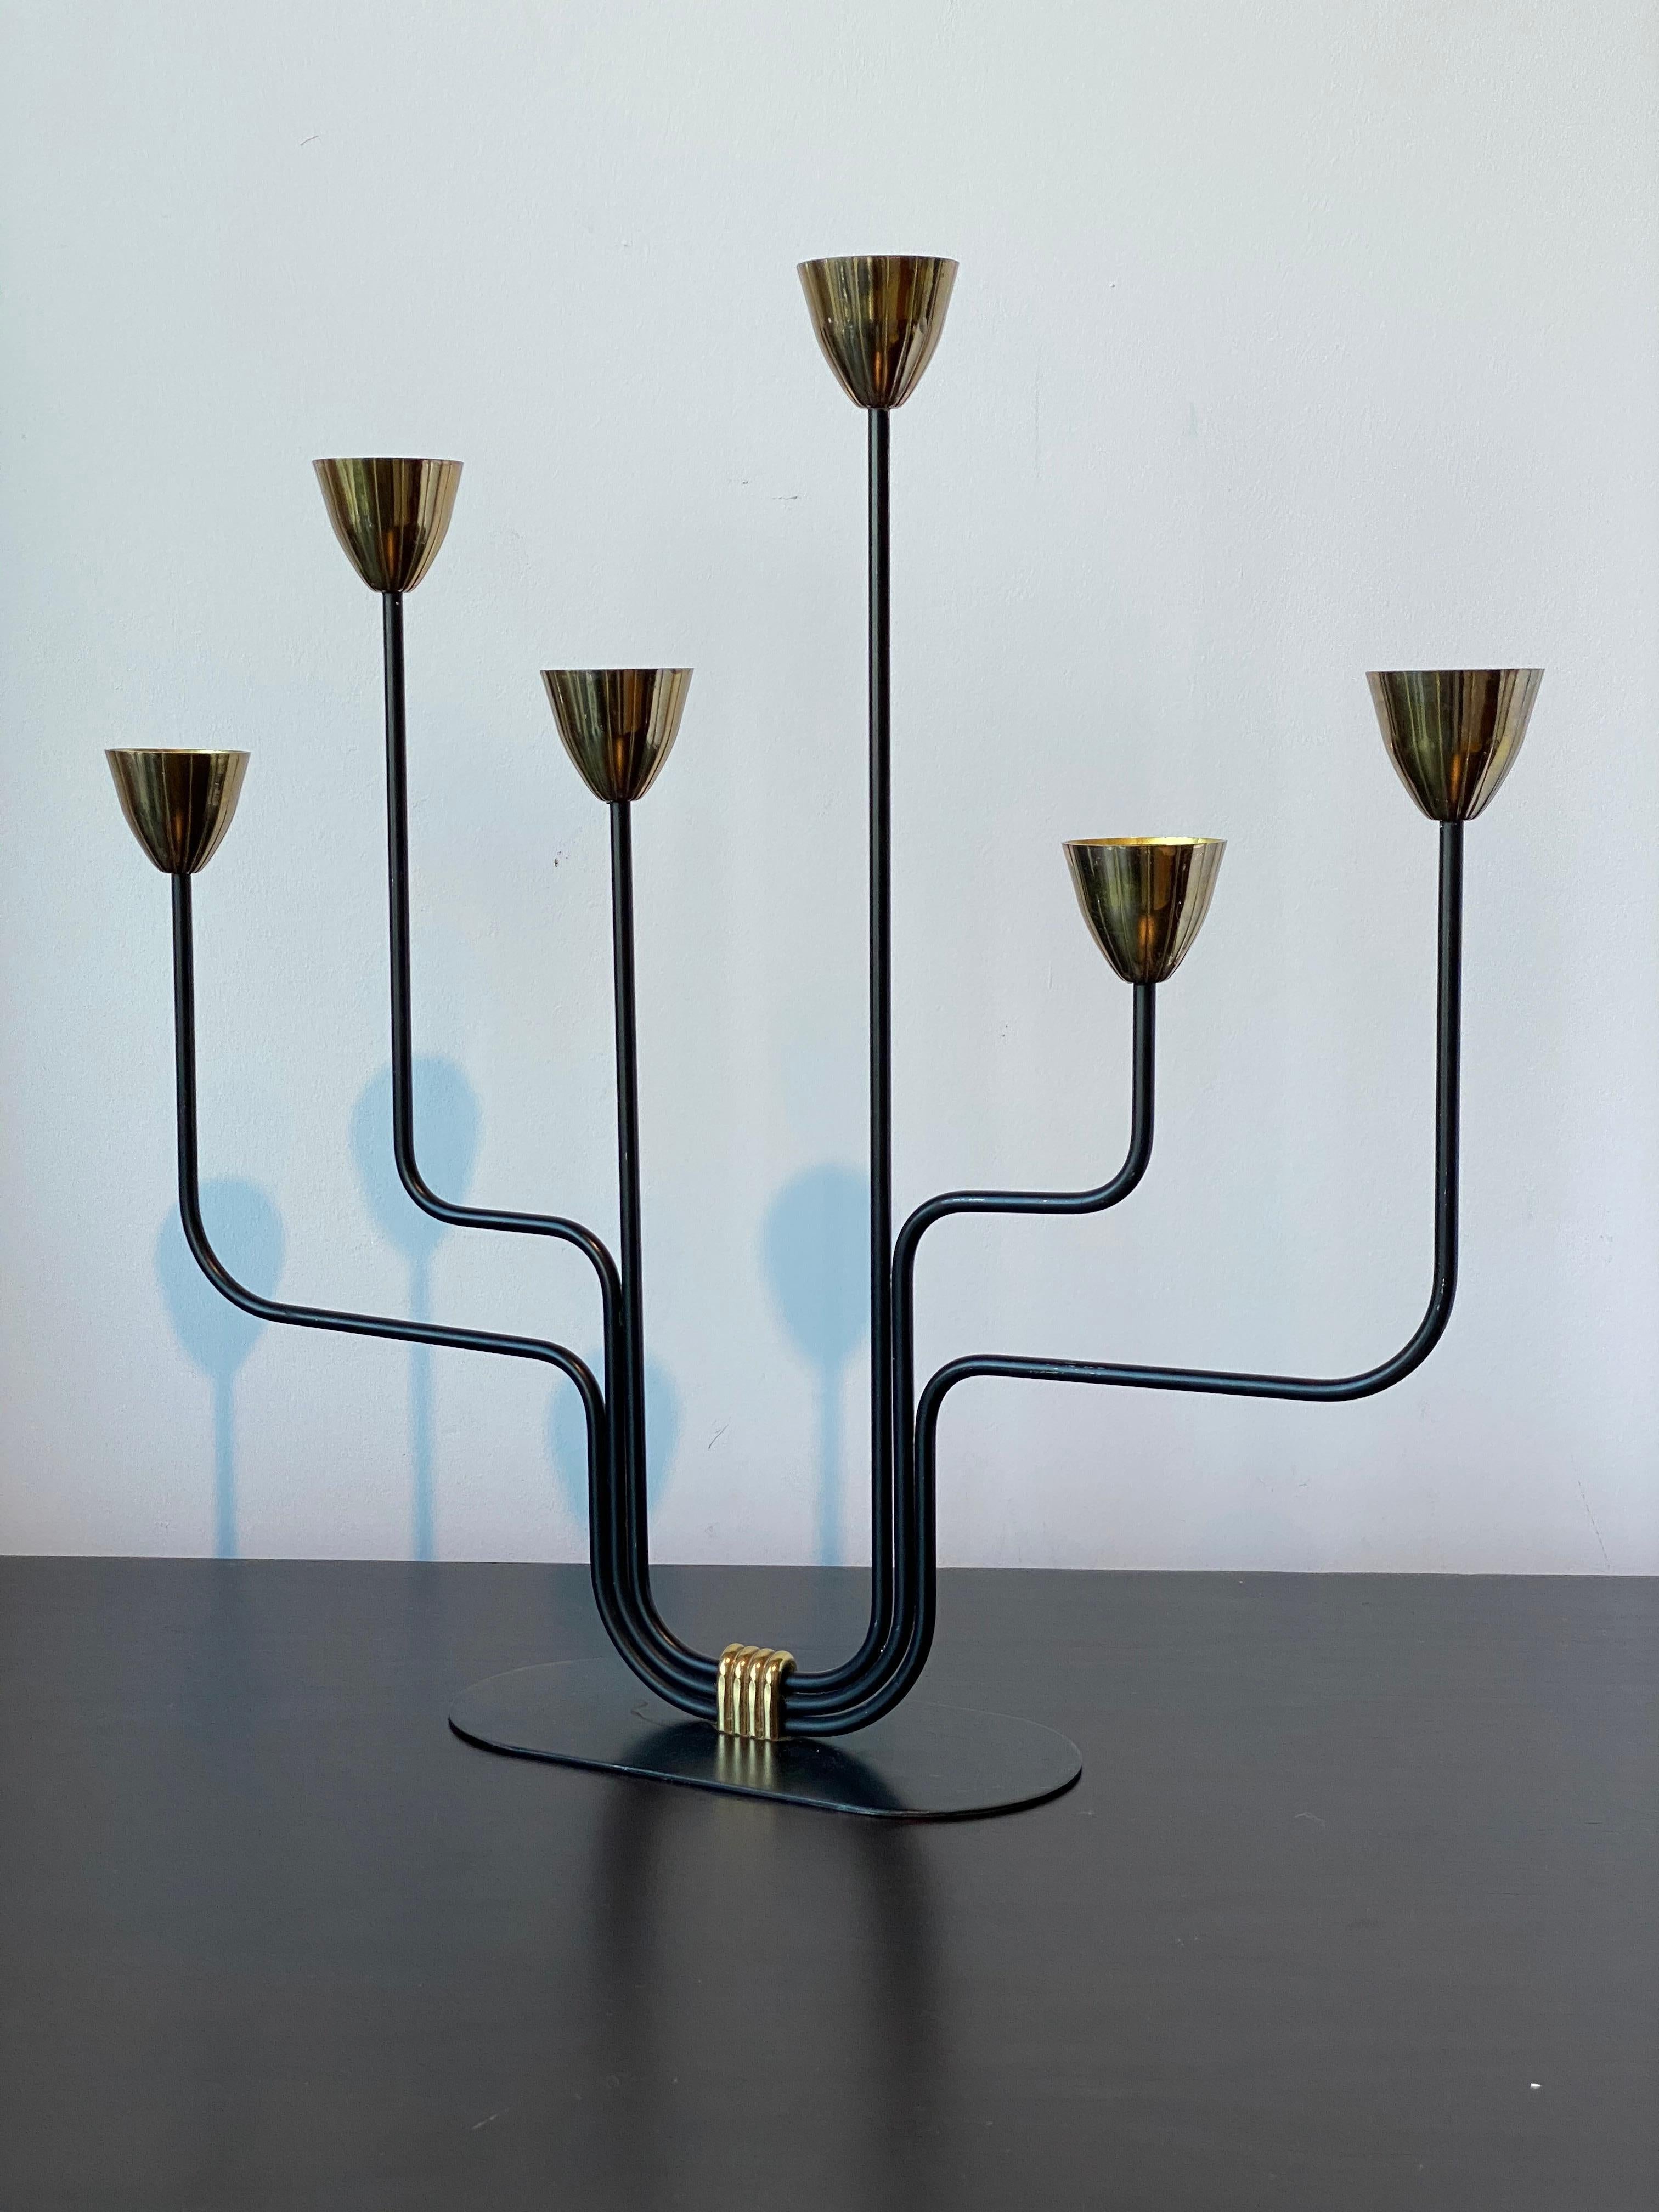 A pair of organic candelabras / candleholders, designed by Gunnar Ander for Ystad Metall, Sweden, 1950s. In brass and lacquered steel. Stamped.

Other designers of the period include Piet Hein, Paavo Tynell, Josef Frank, and Jean Royere.

 